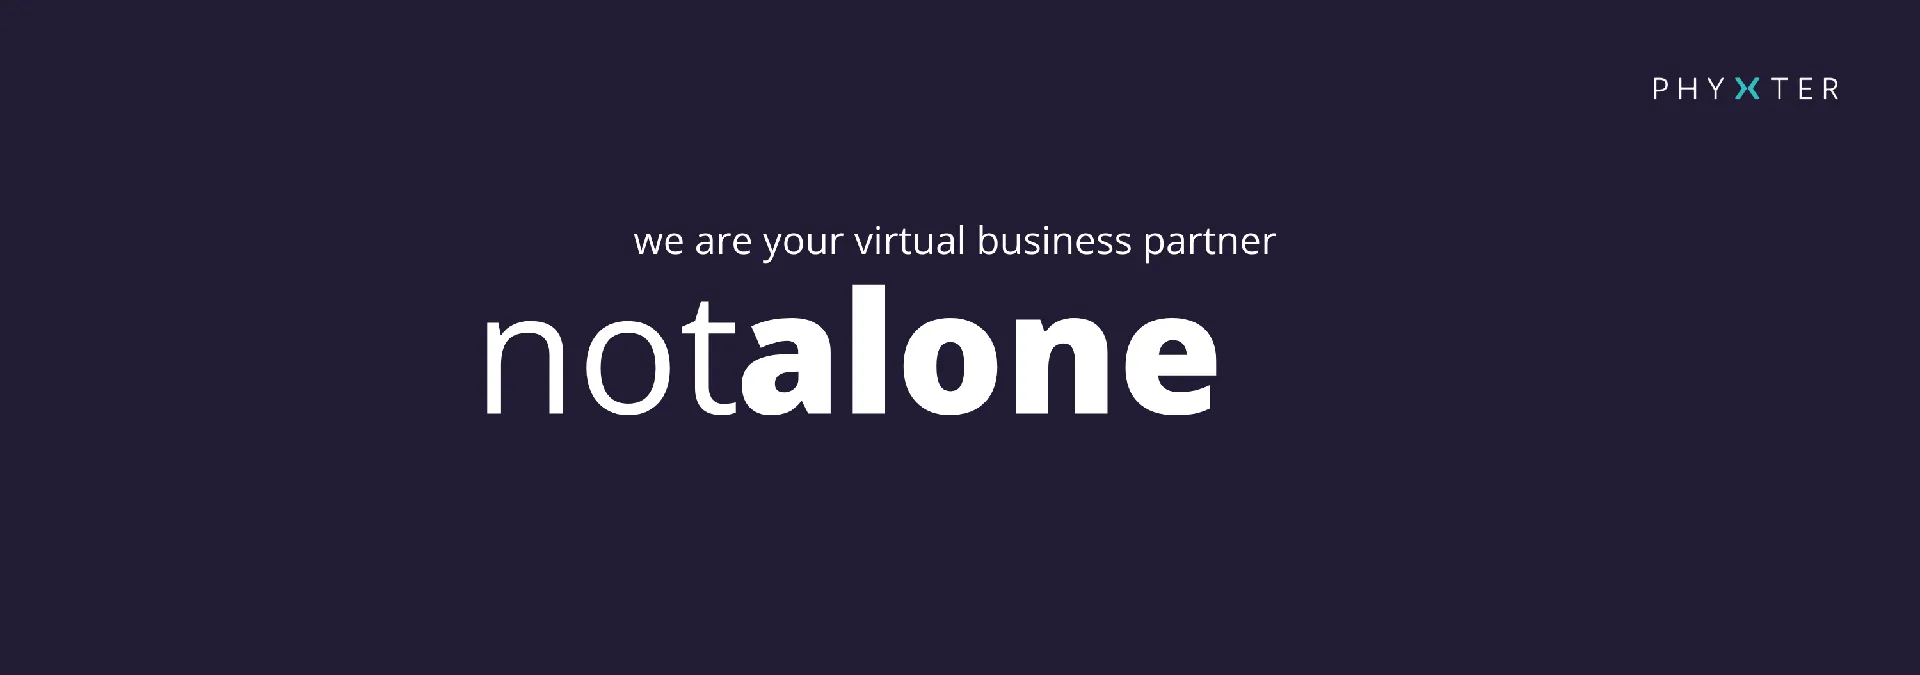 We are your virtual business partner in text